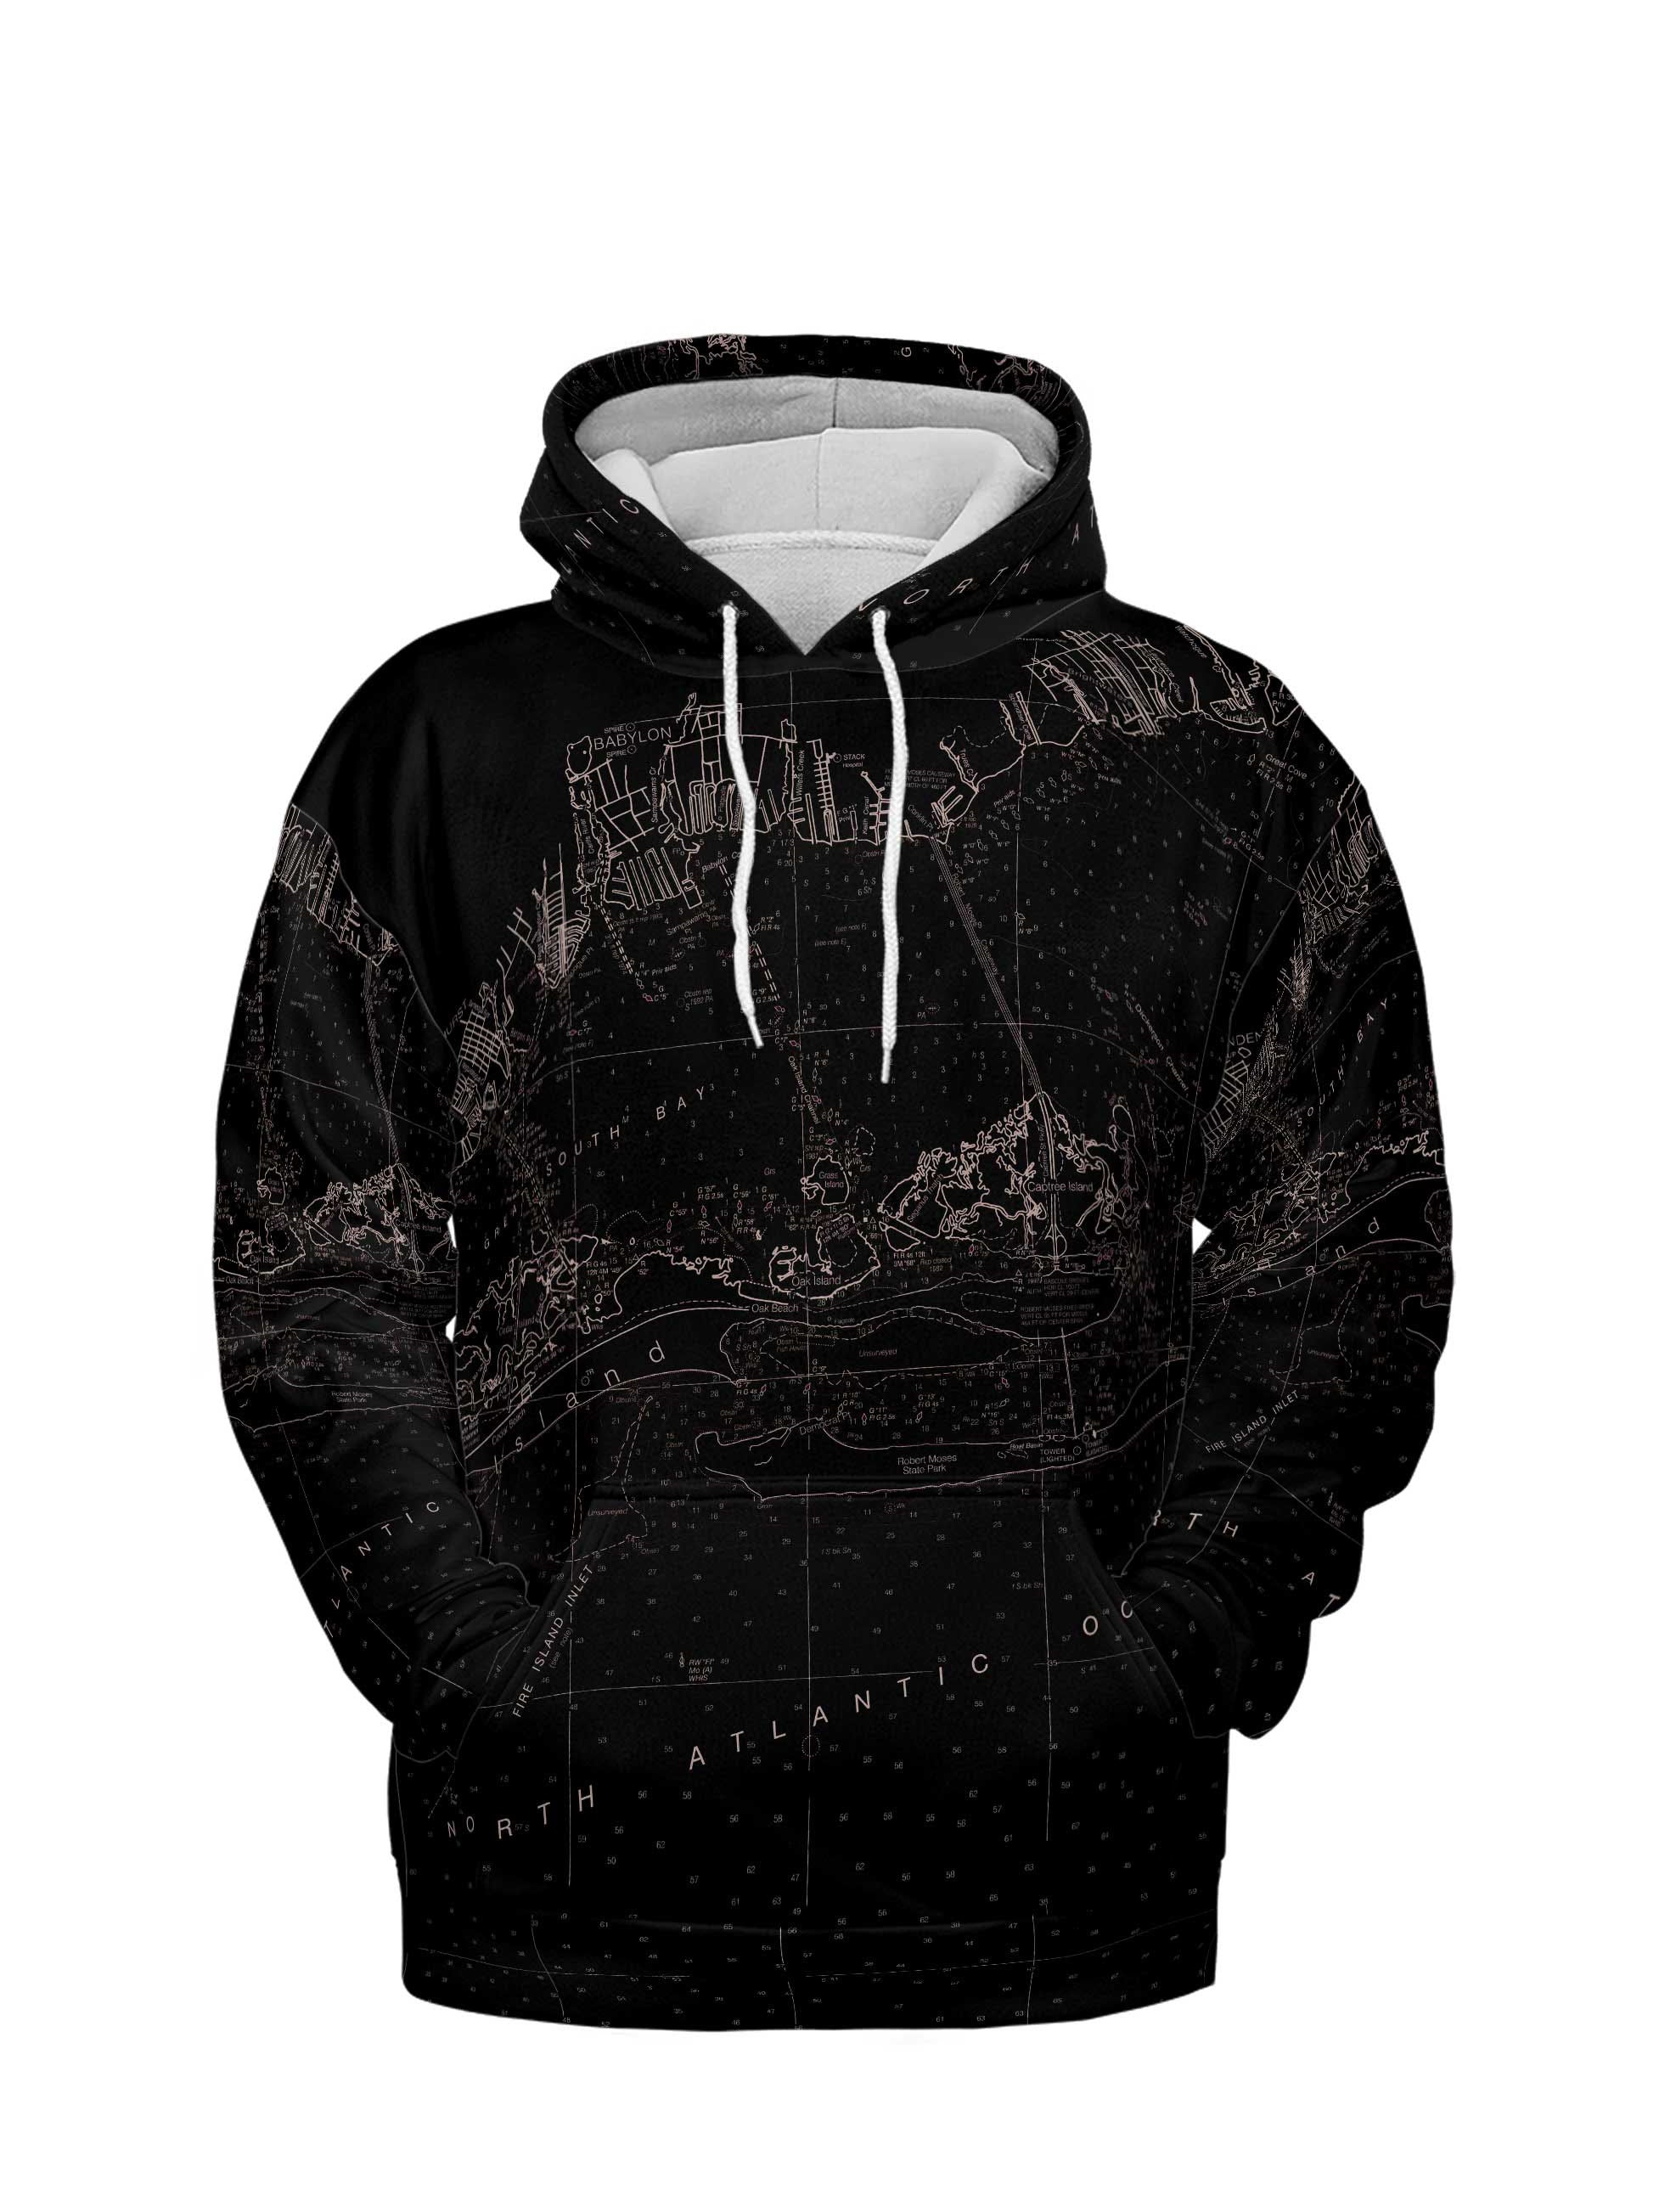 New York Fire Island Inlet black hoodie front